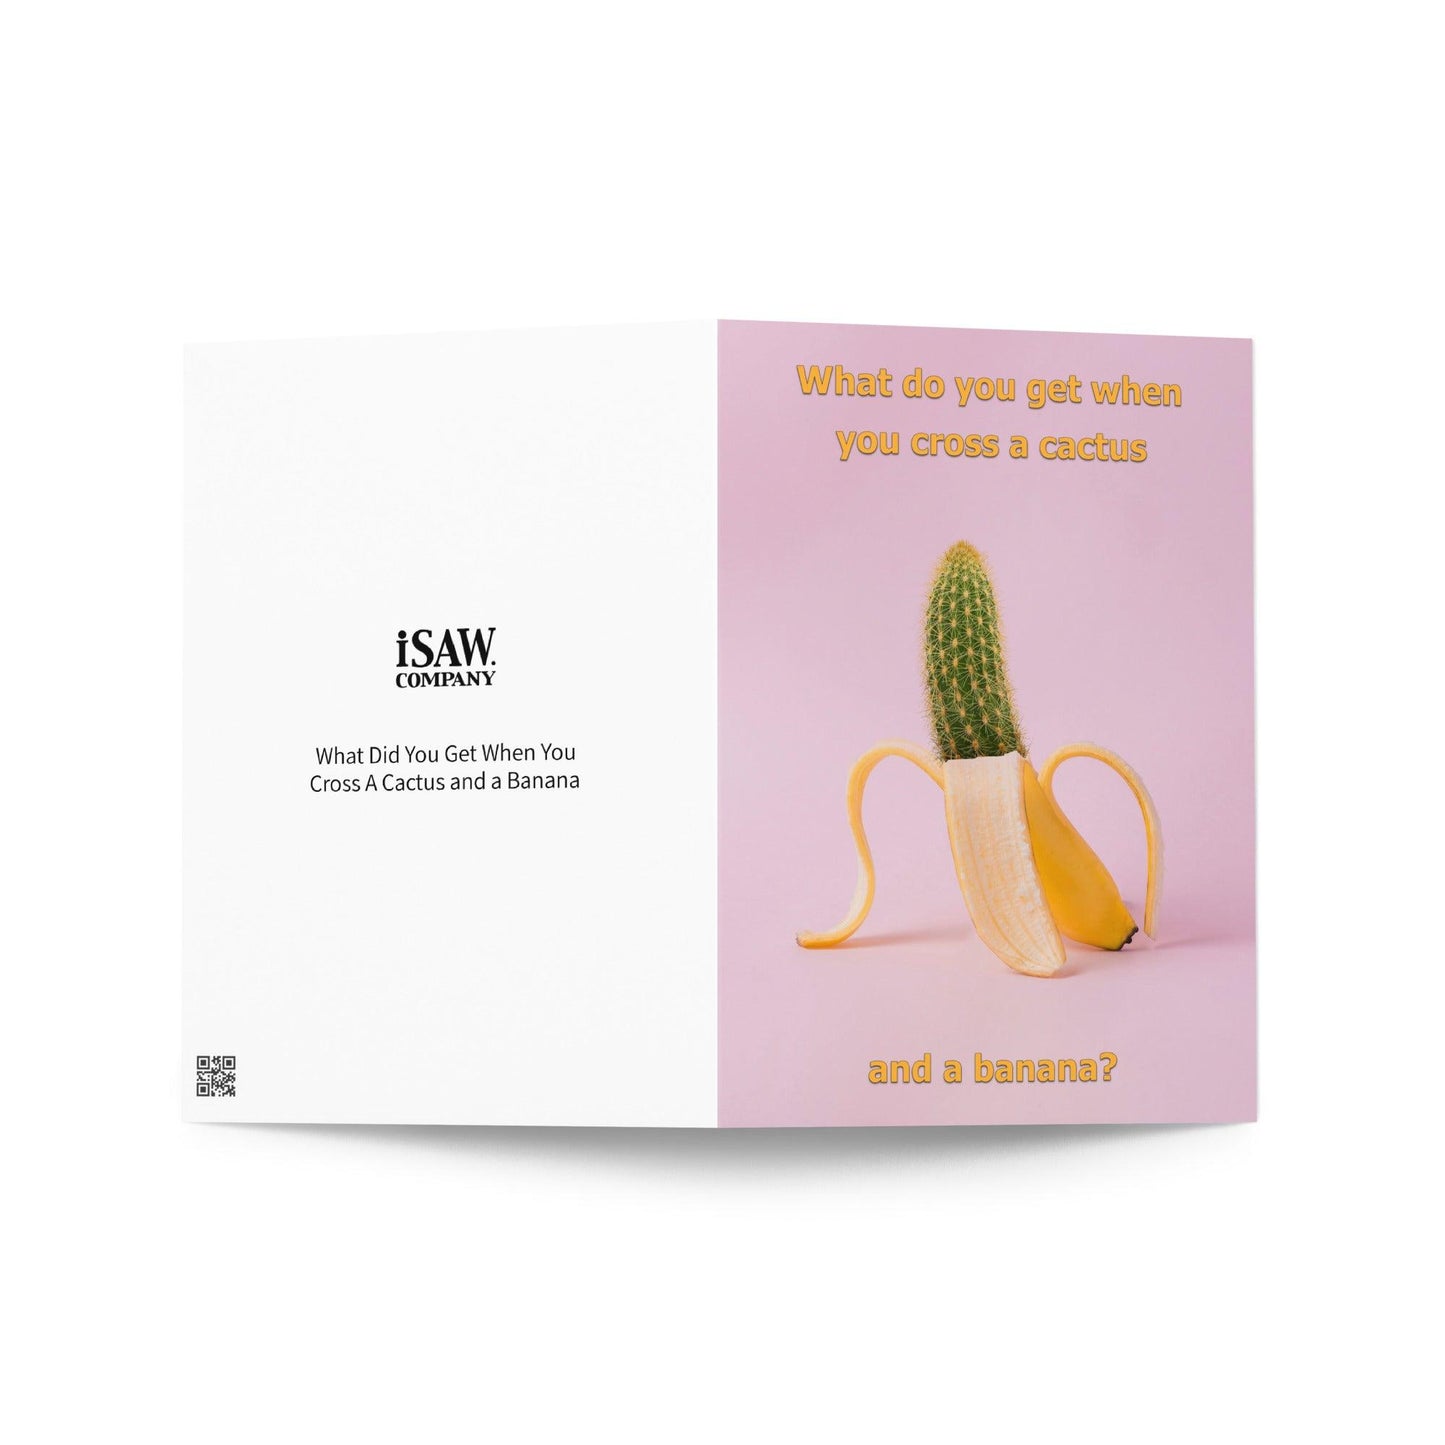 What Do You Get When You Cross A Cactus and a Banana - Note Card - iSAW Company